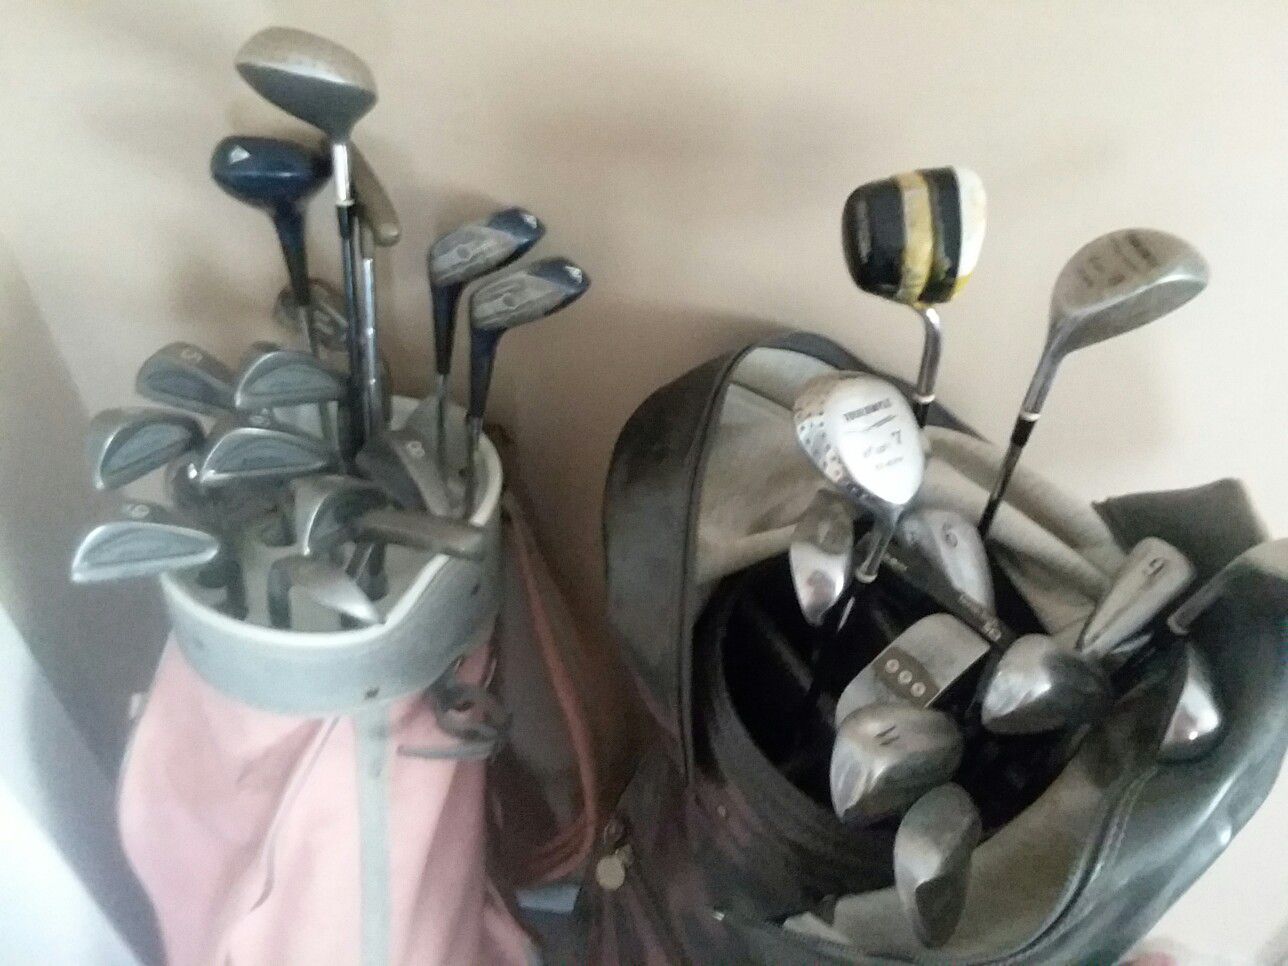 His and hers golf clubs